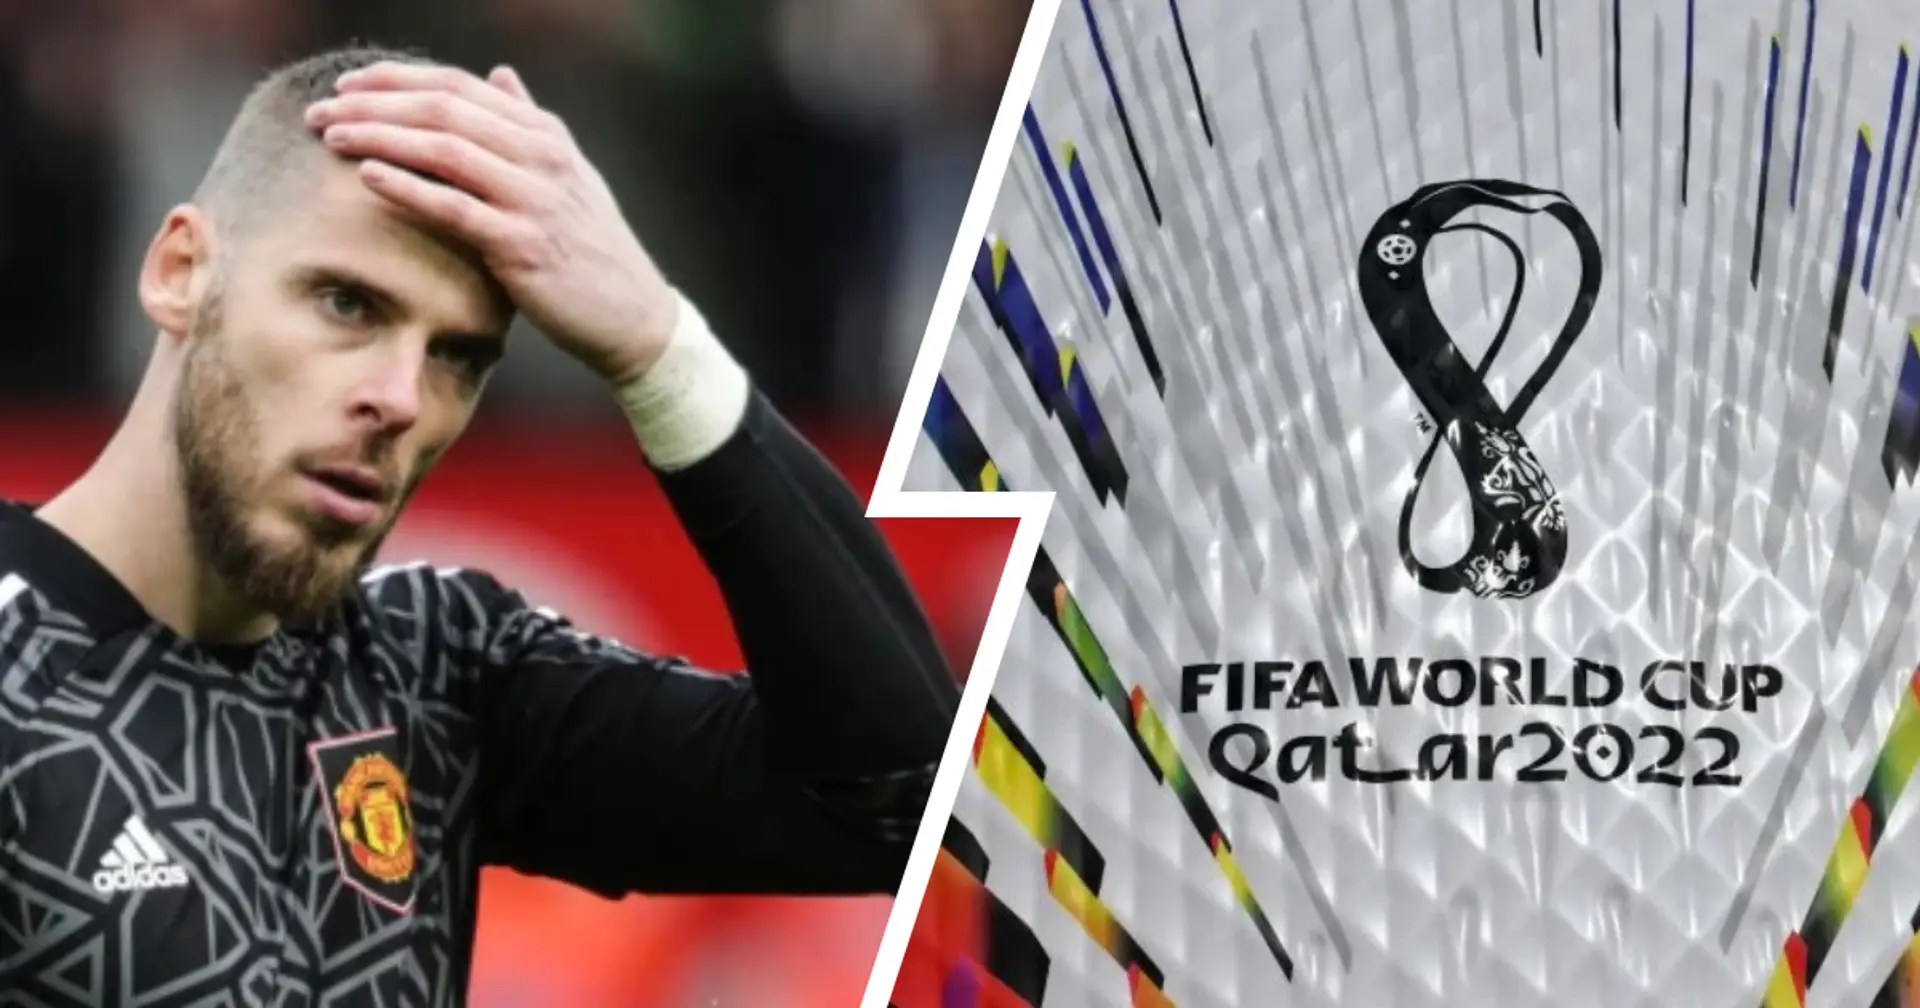 David De Gea 'out of World Cup' after failing to make Spain's preliminary squad